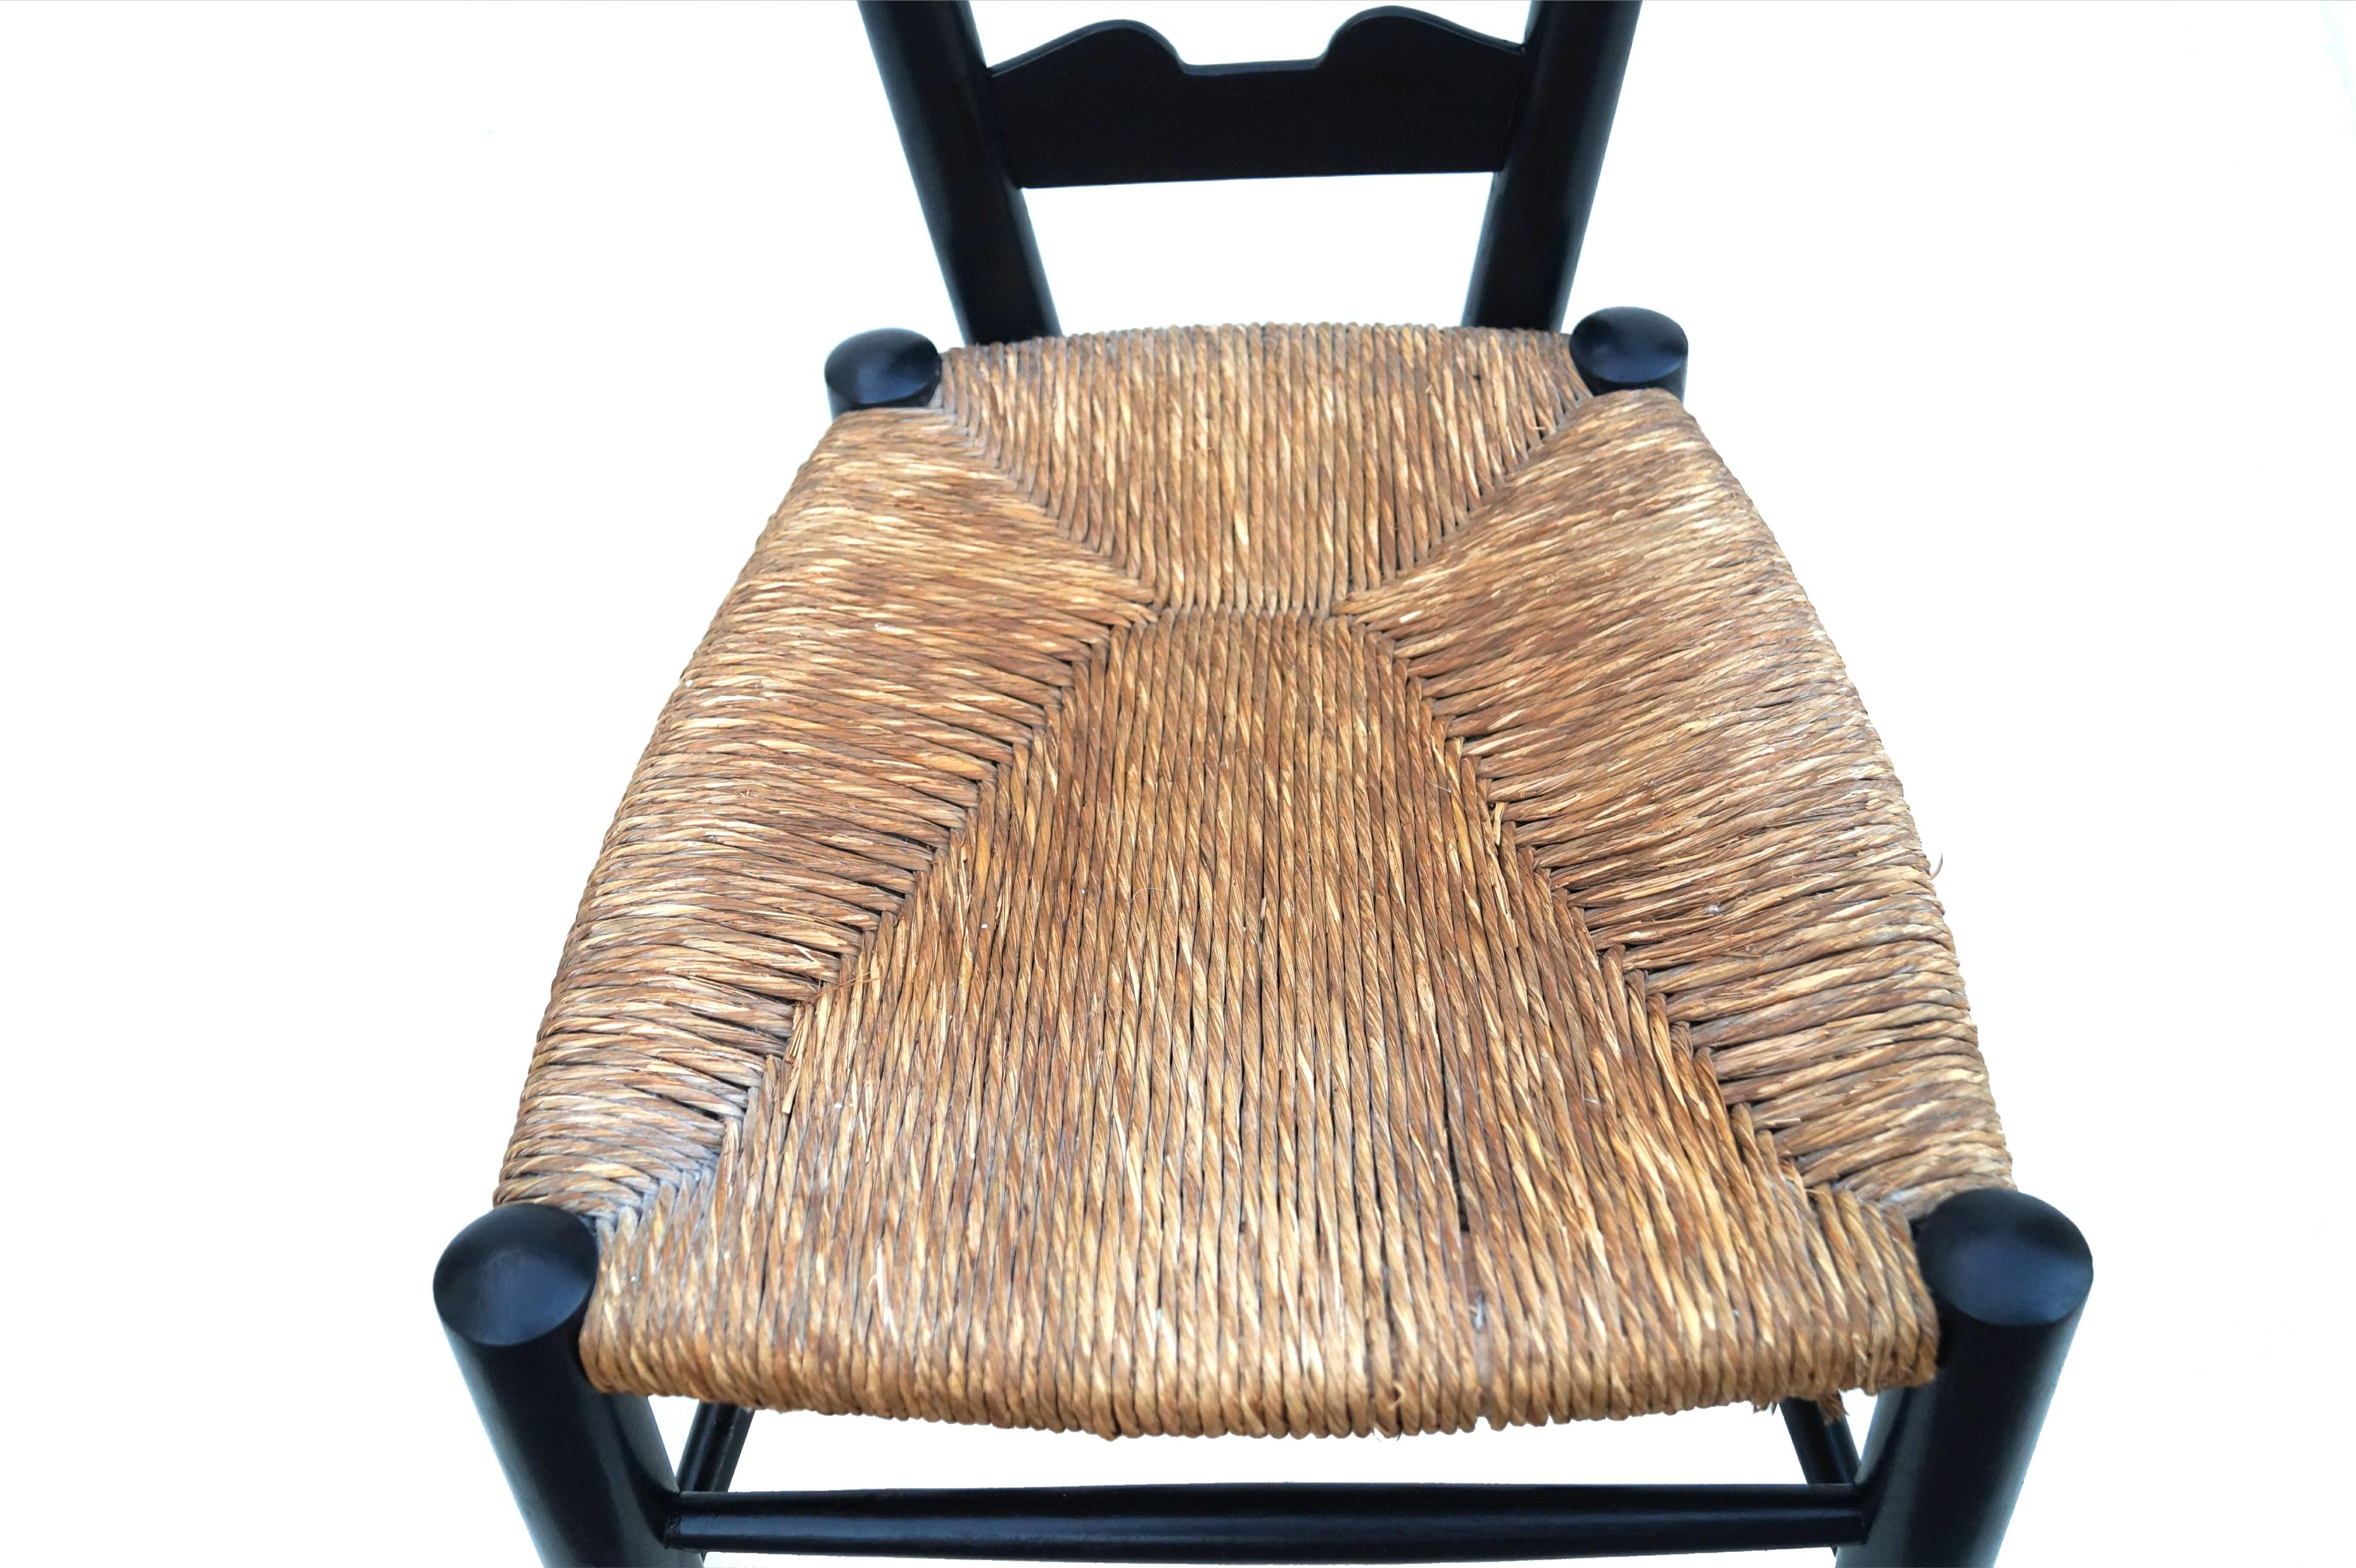 Wood Gio Ponti For Casa E Giardino  Fireside Side Accent Chair Black Rush Seat 1930's For Sale